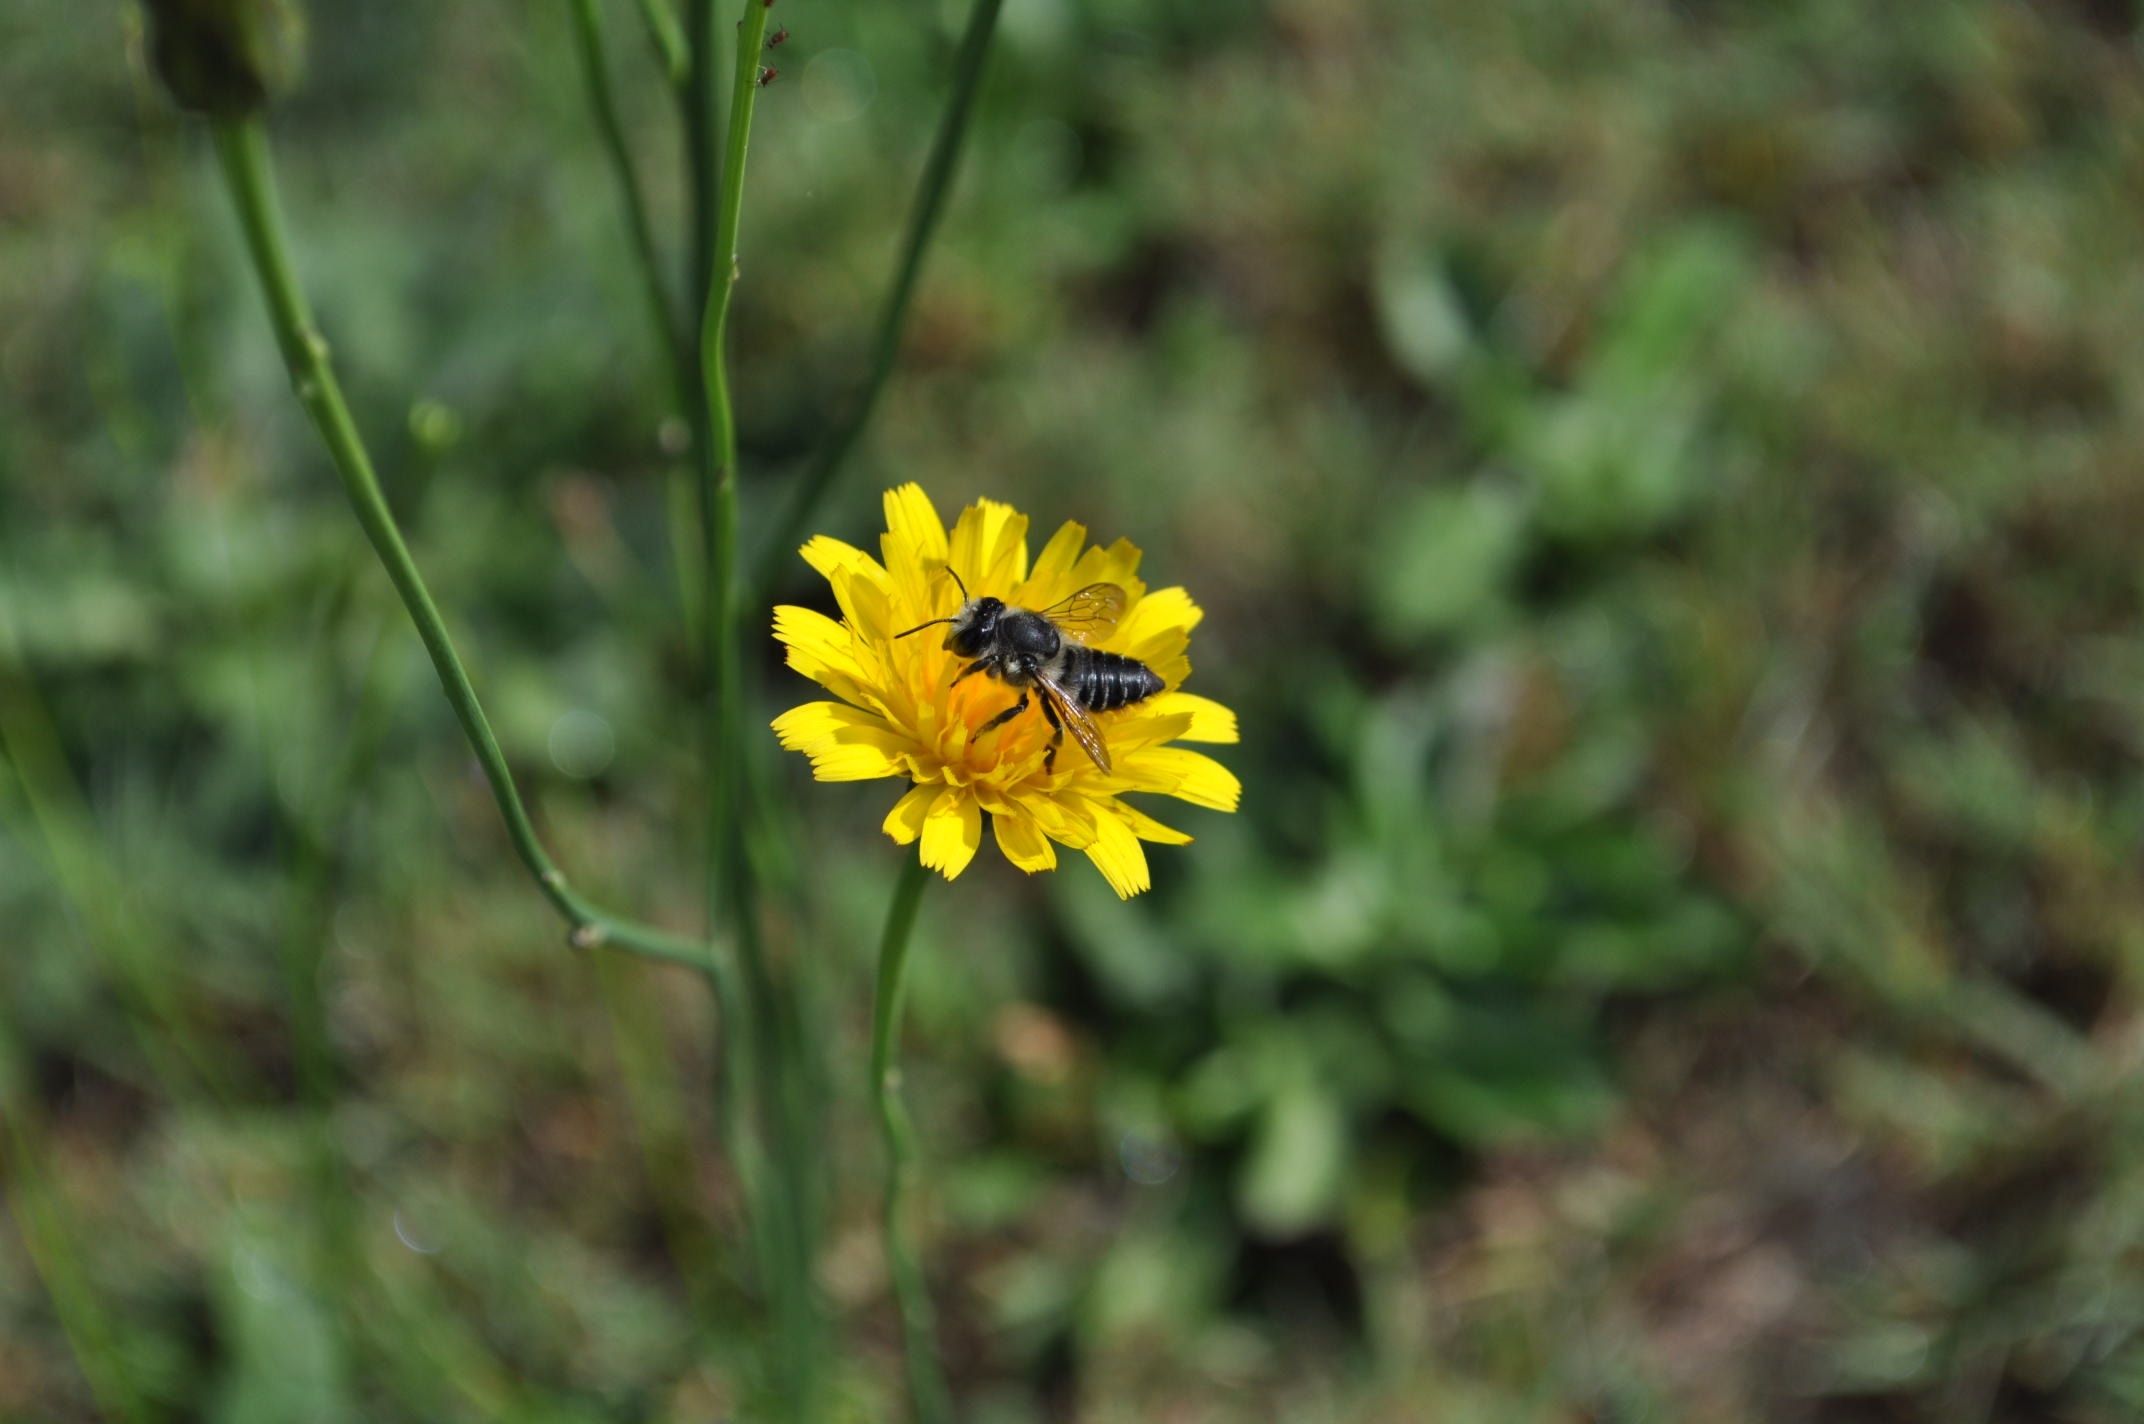 carpenter bee perched on yellow flower